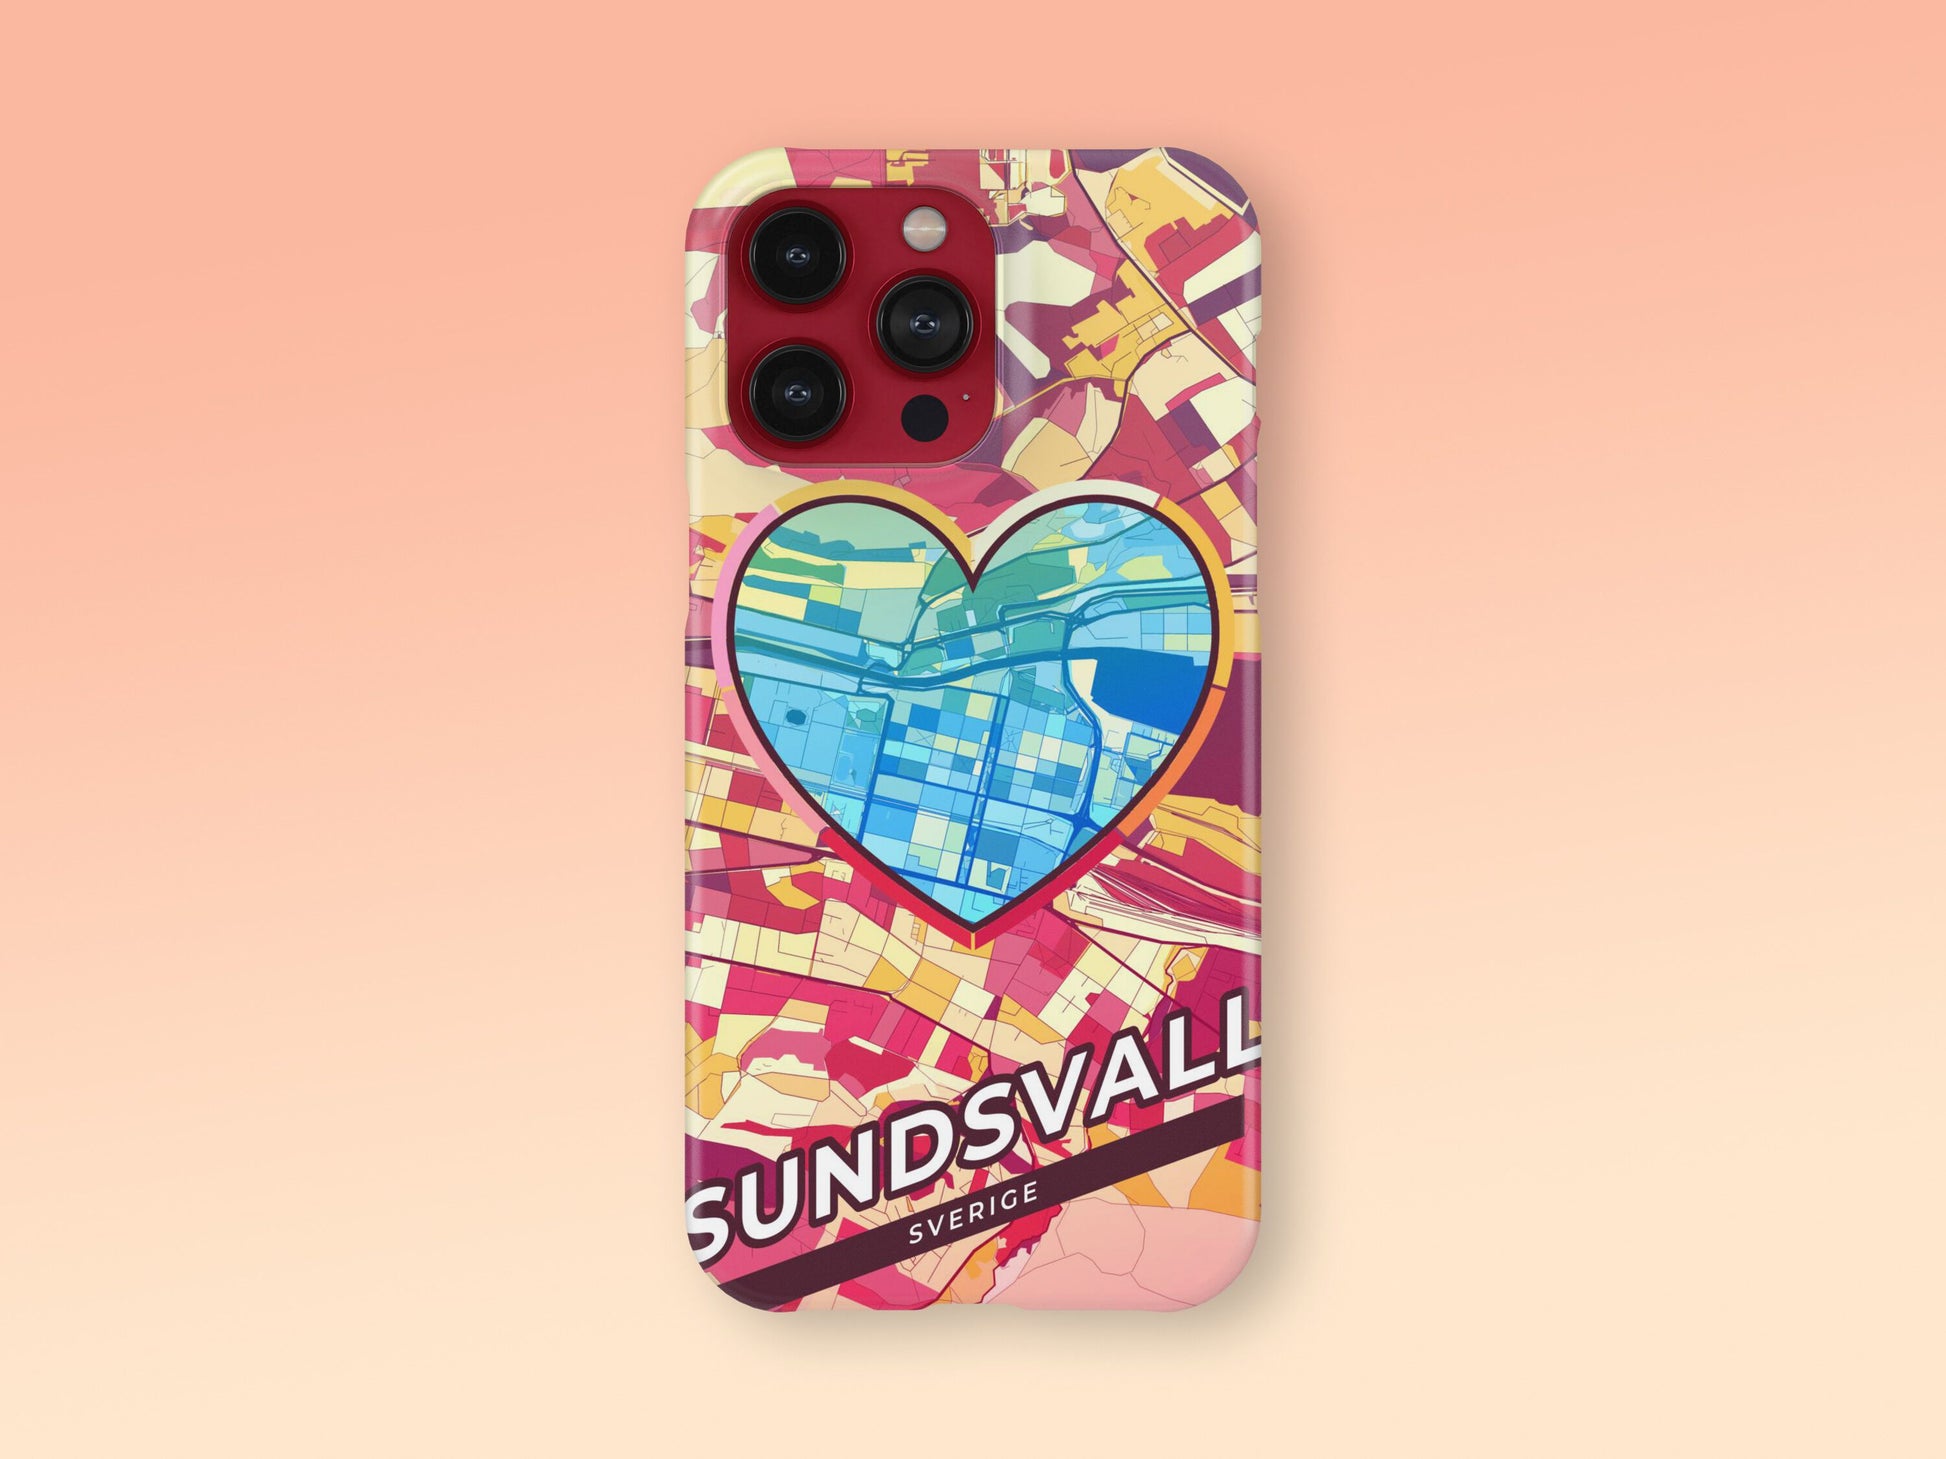 Sundsvall Sweden slim phone case with colorful icon 2